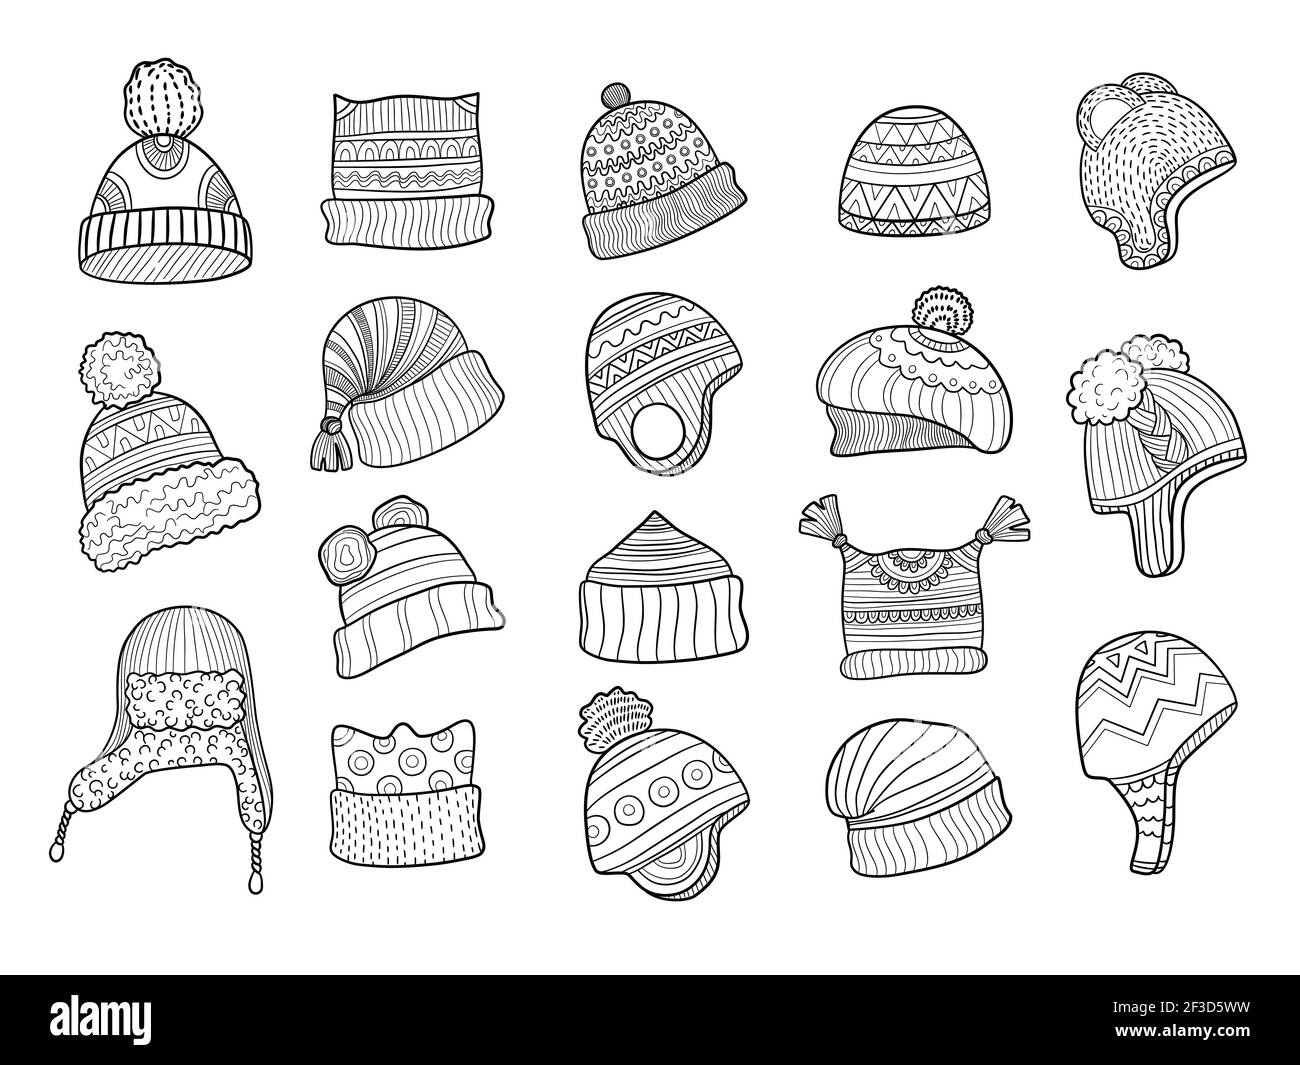 Winter doodle hat. Clothes flapping ears warm hat with fur knitted vector sketches illustrations Stock Vector